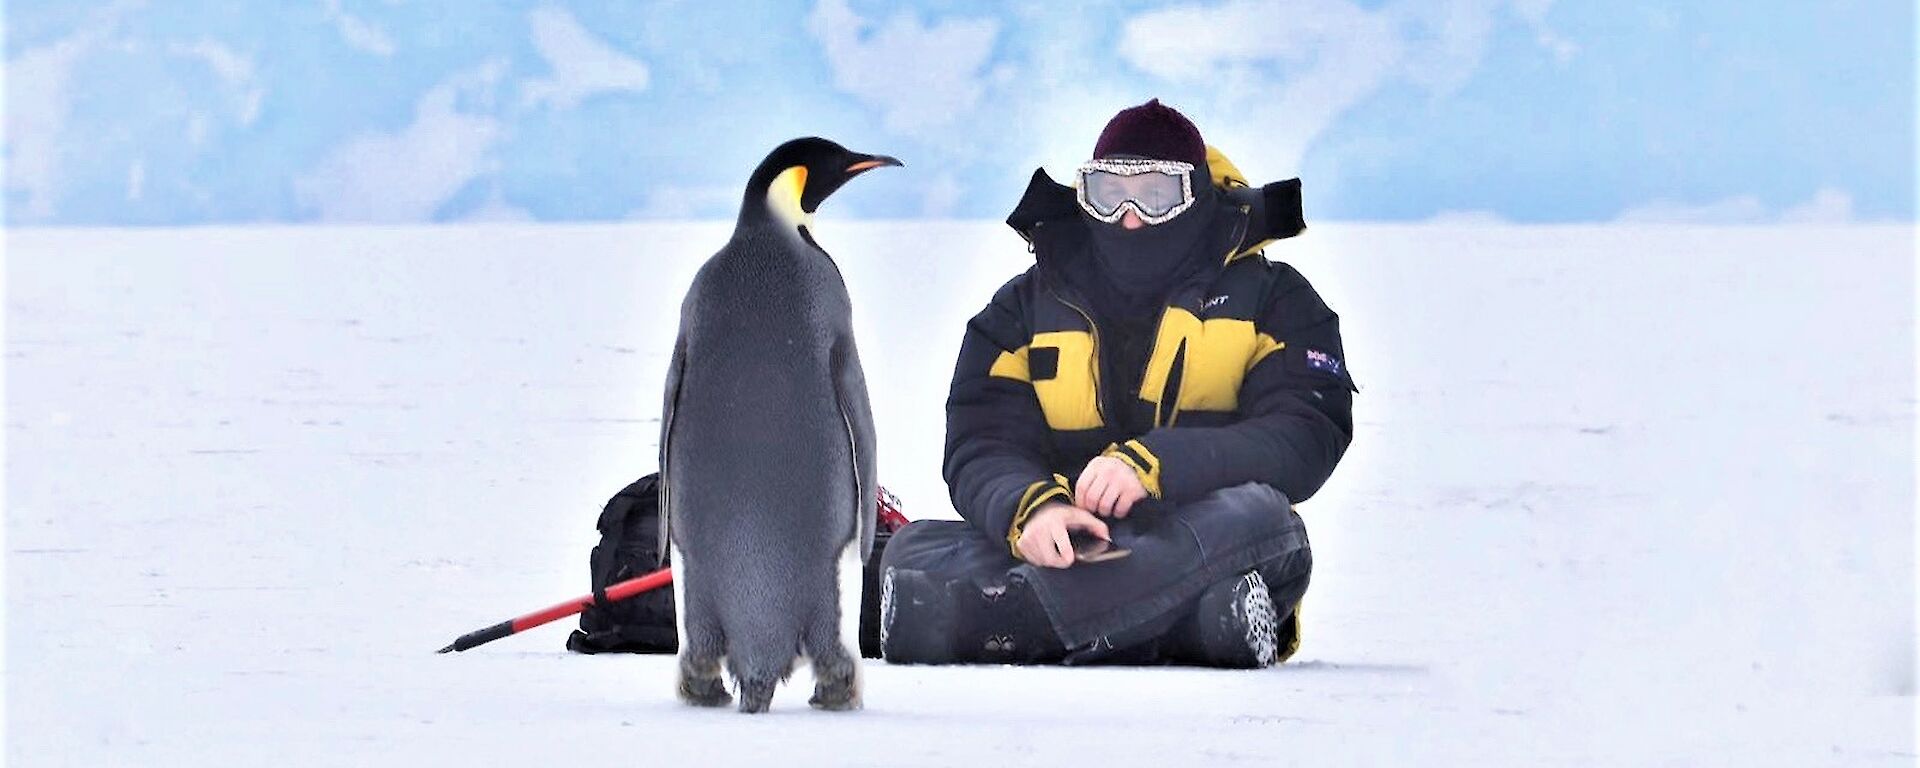 Hi buddy': the story of one emperor penguin and an Antarctic expeditioner –  Australian Antarctic Program (News 2021)